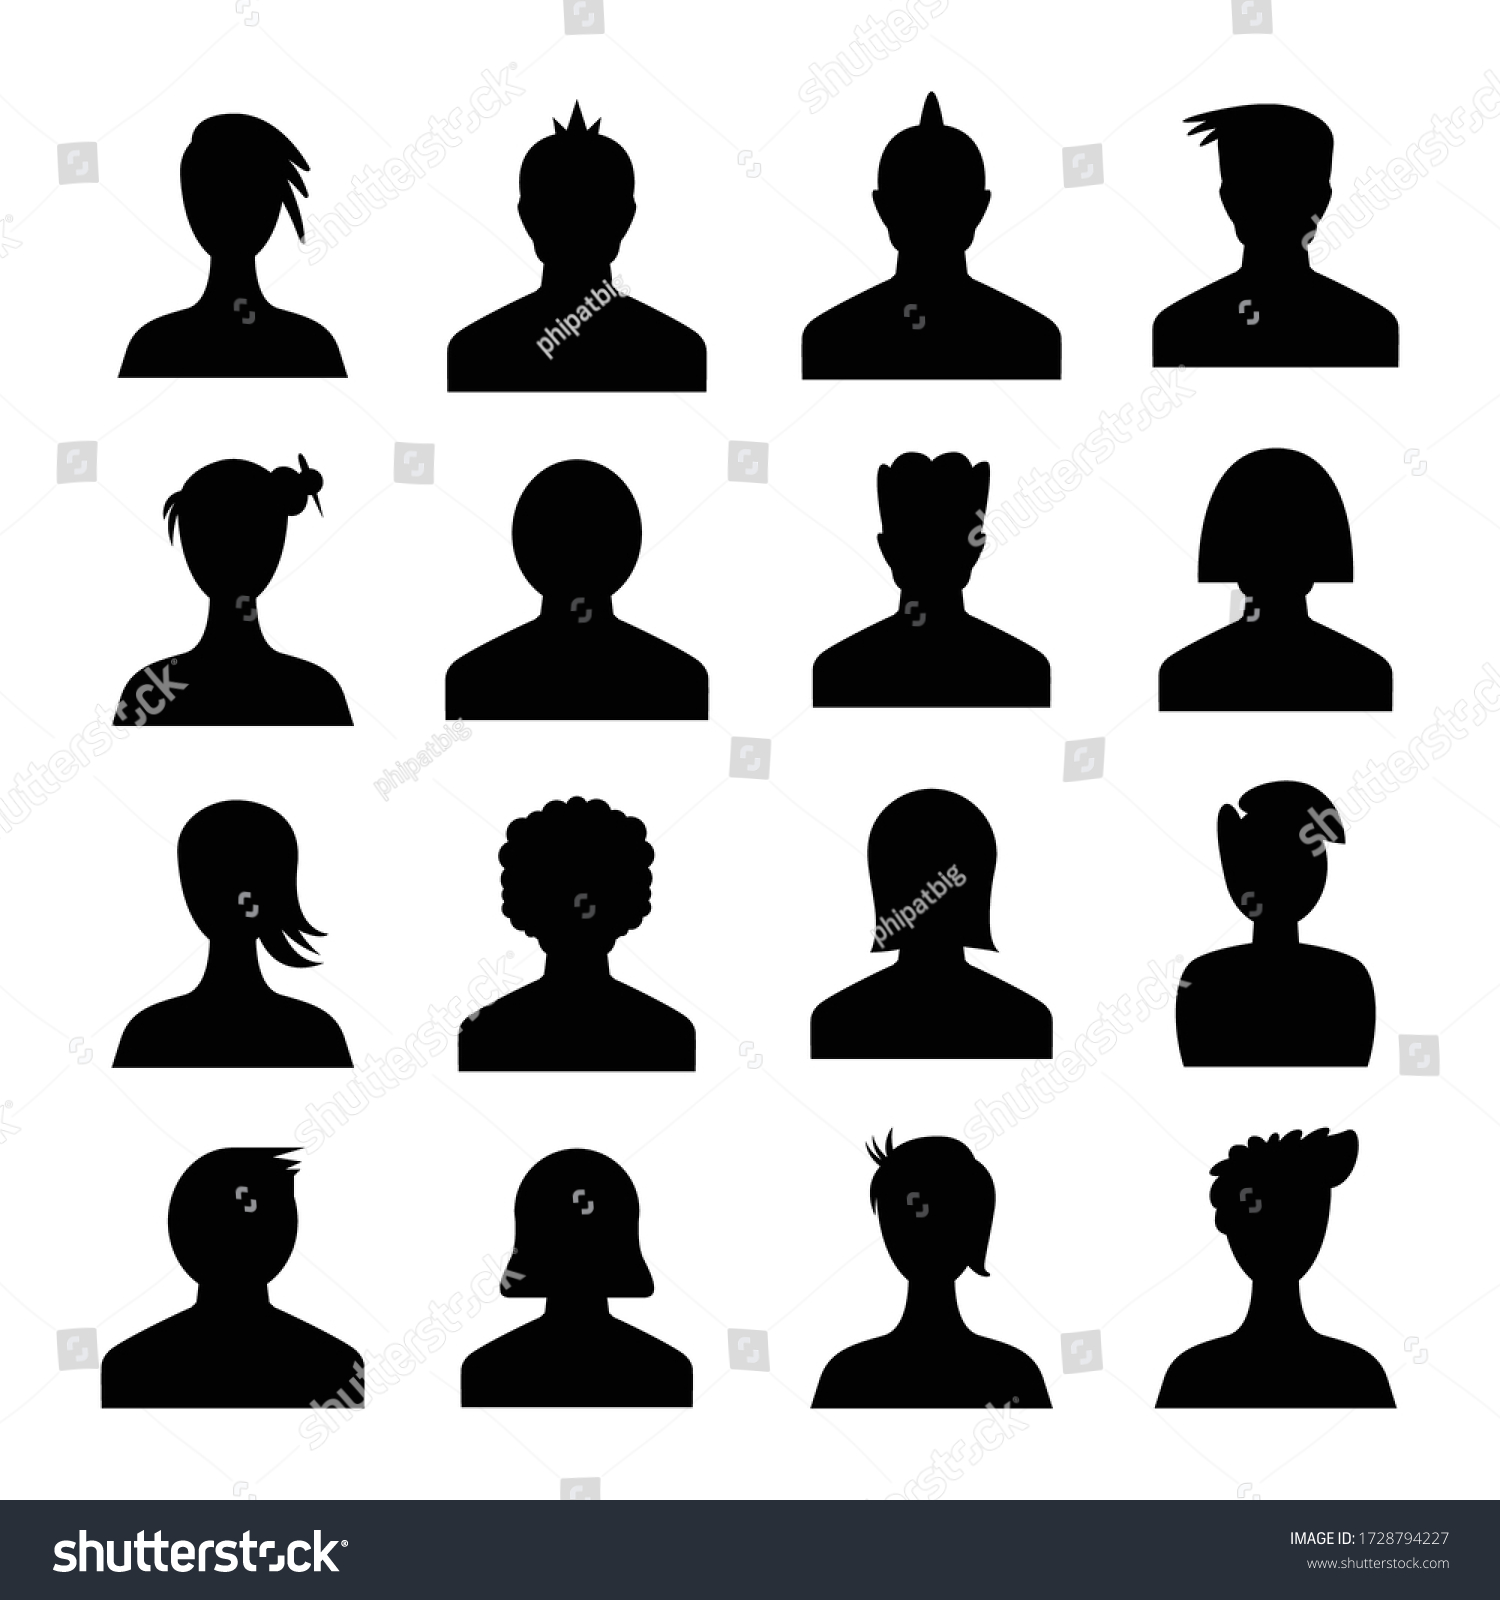 Human Avatar Icons Set Silhouette Theme Stock Vector (Royalty Free ...